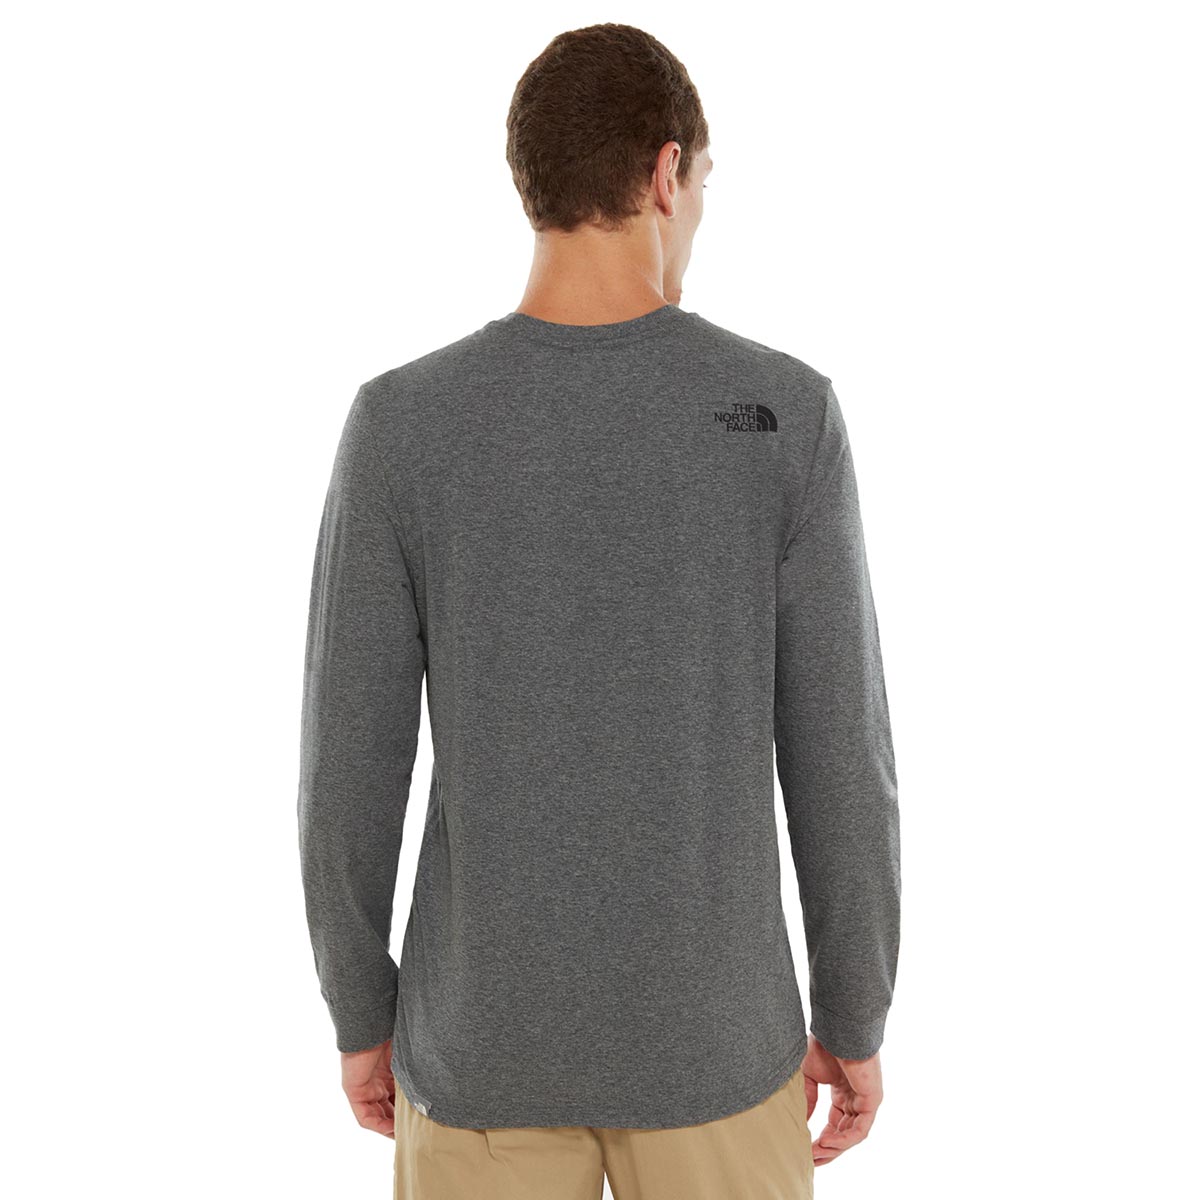 THE NORTH FACE - SIMPLE DOME LONG-SLEEVE SHIRT